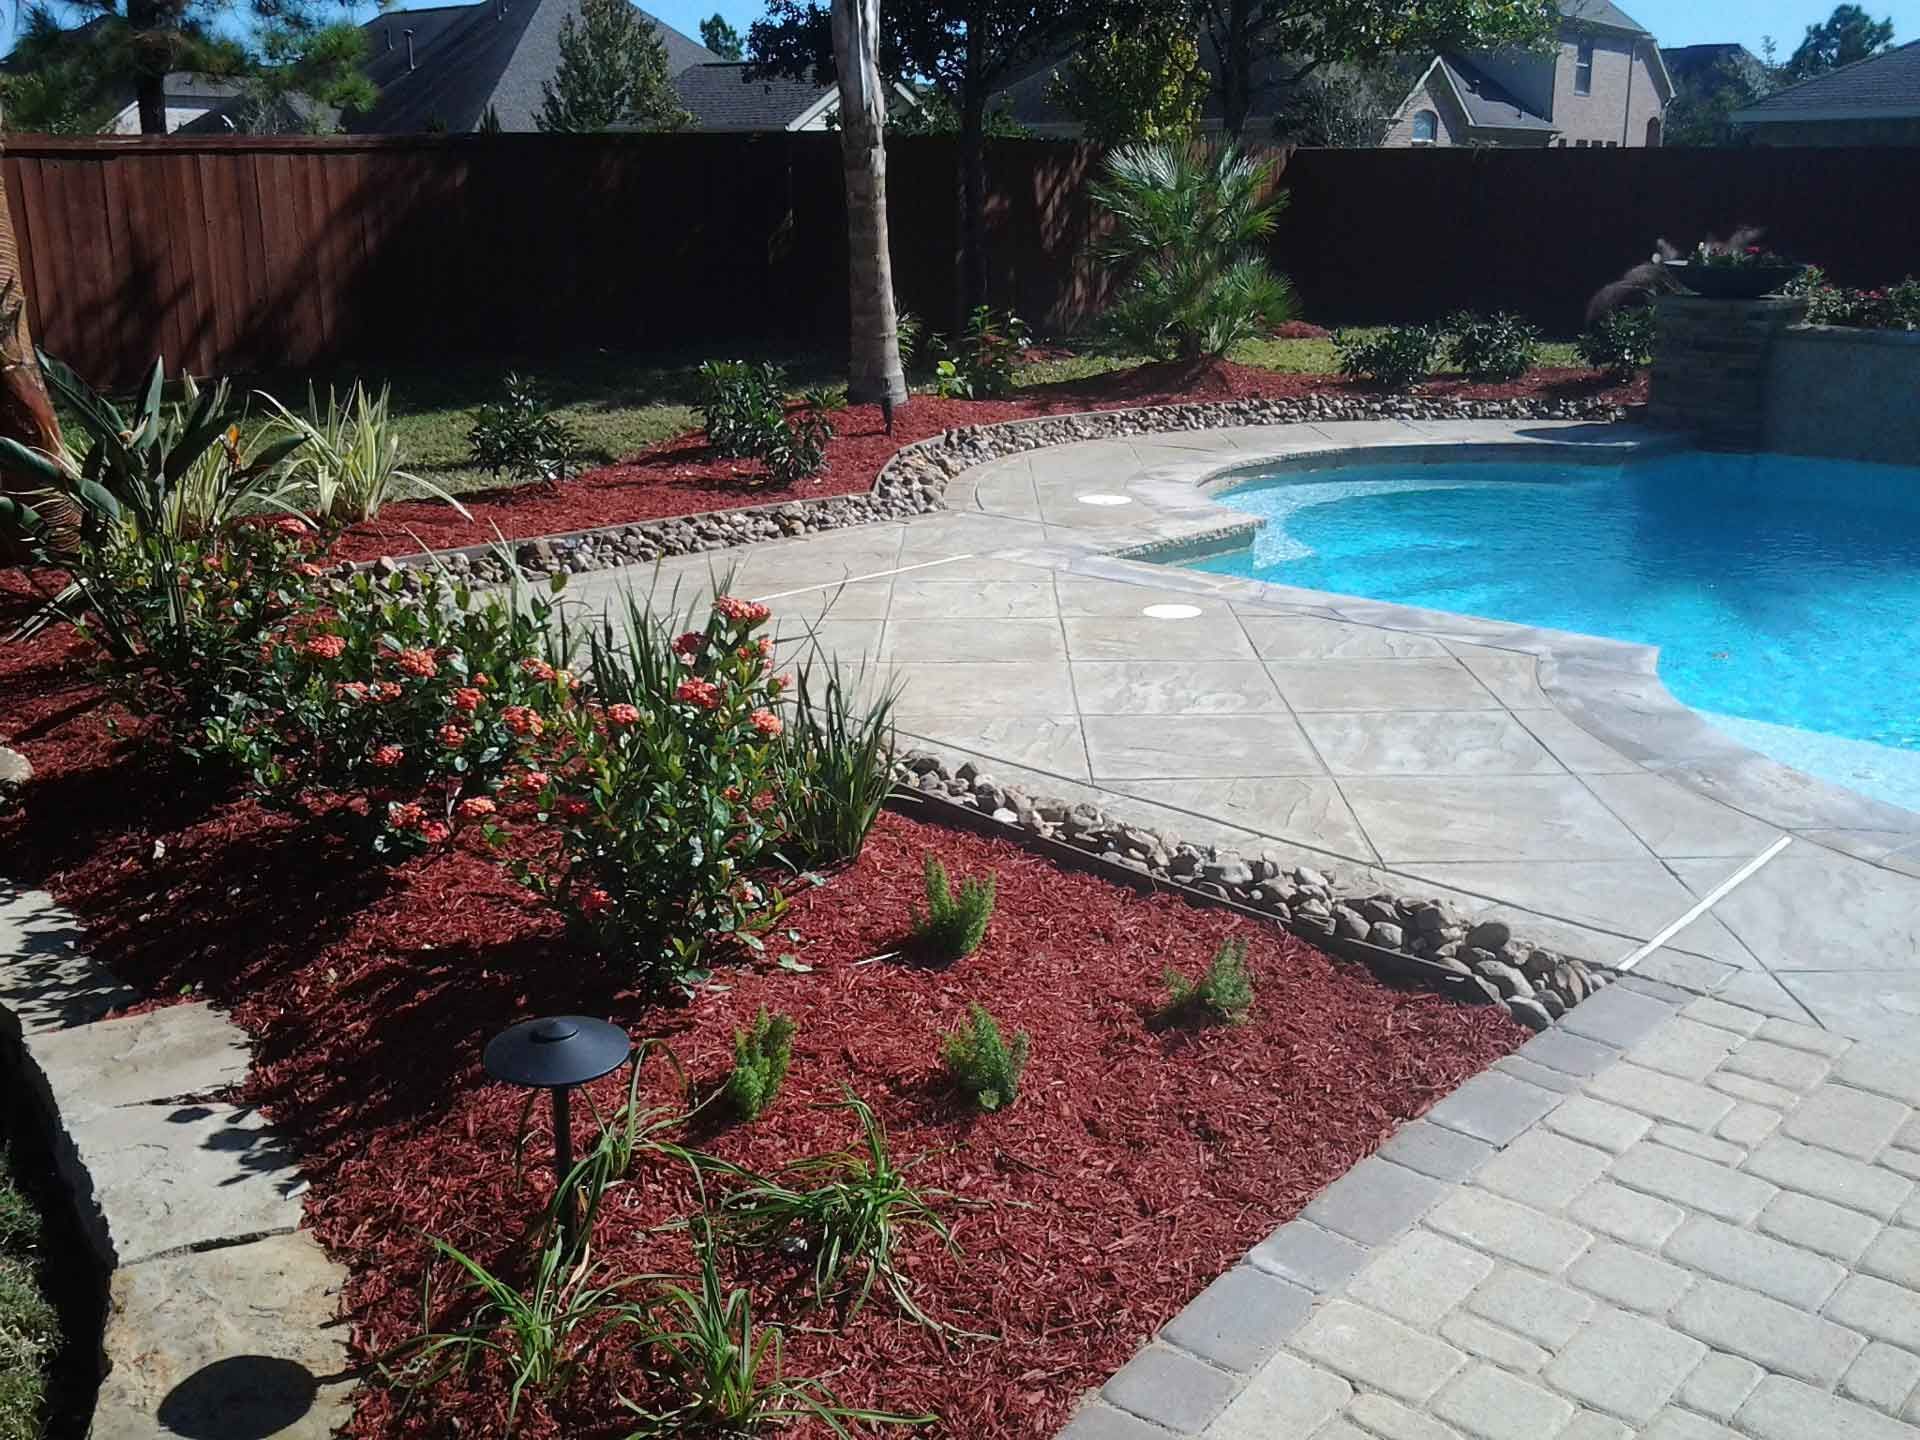 A swimming pool is surrounded by red mulch and flowers.